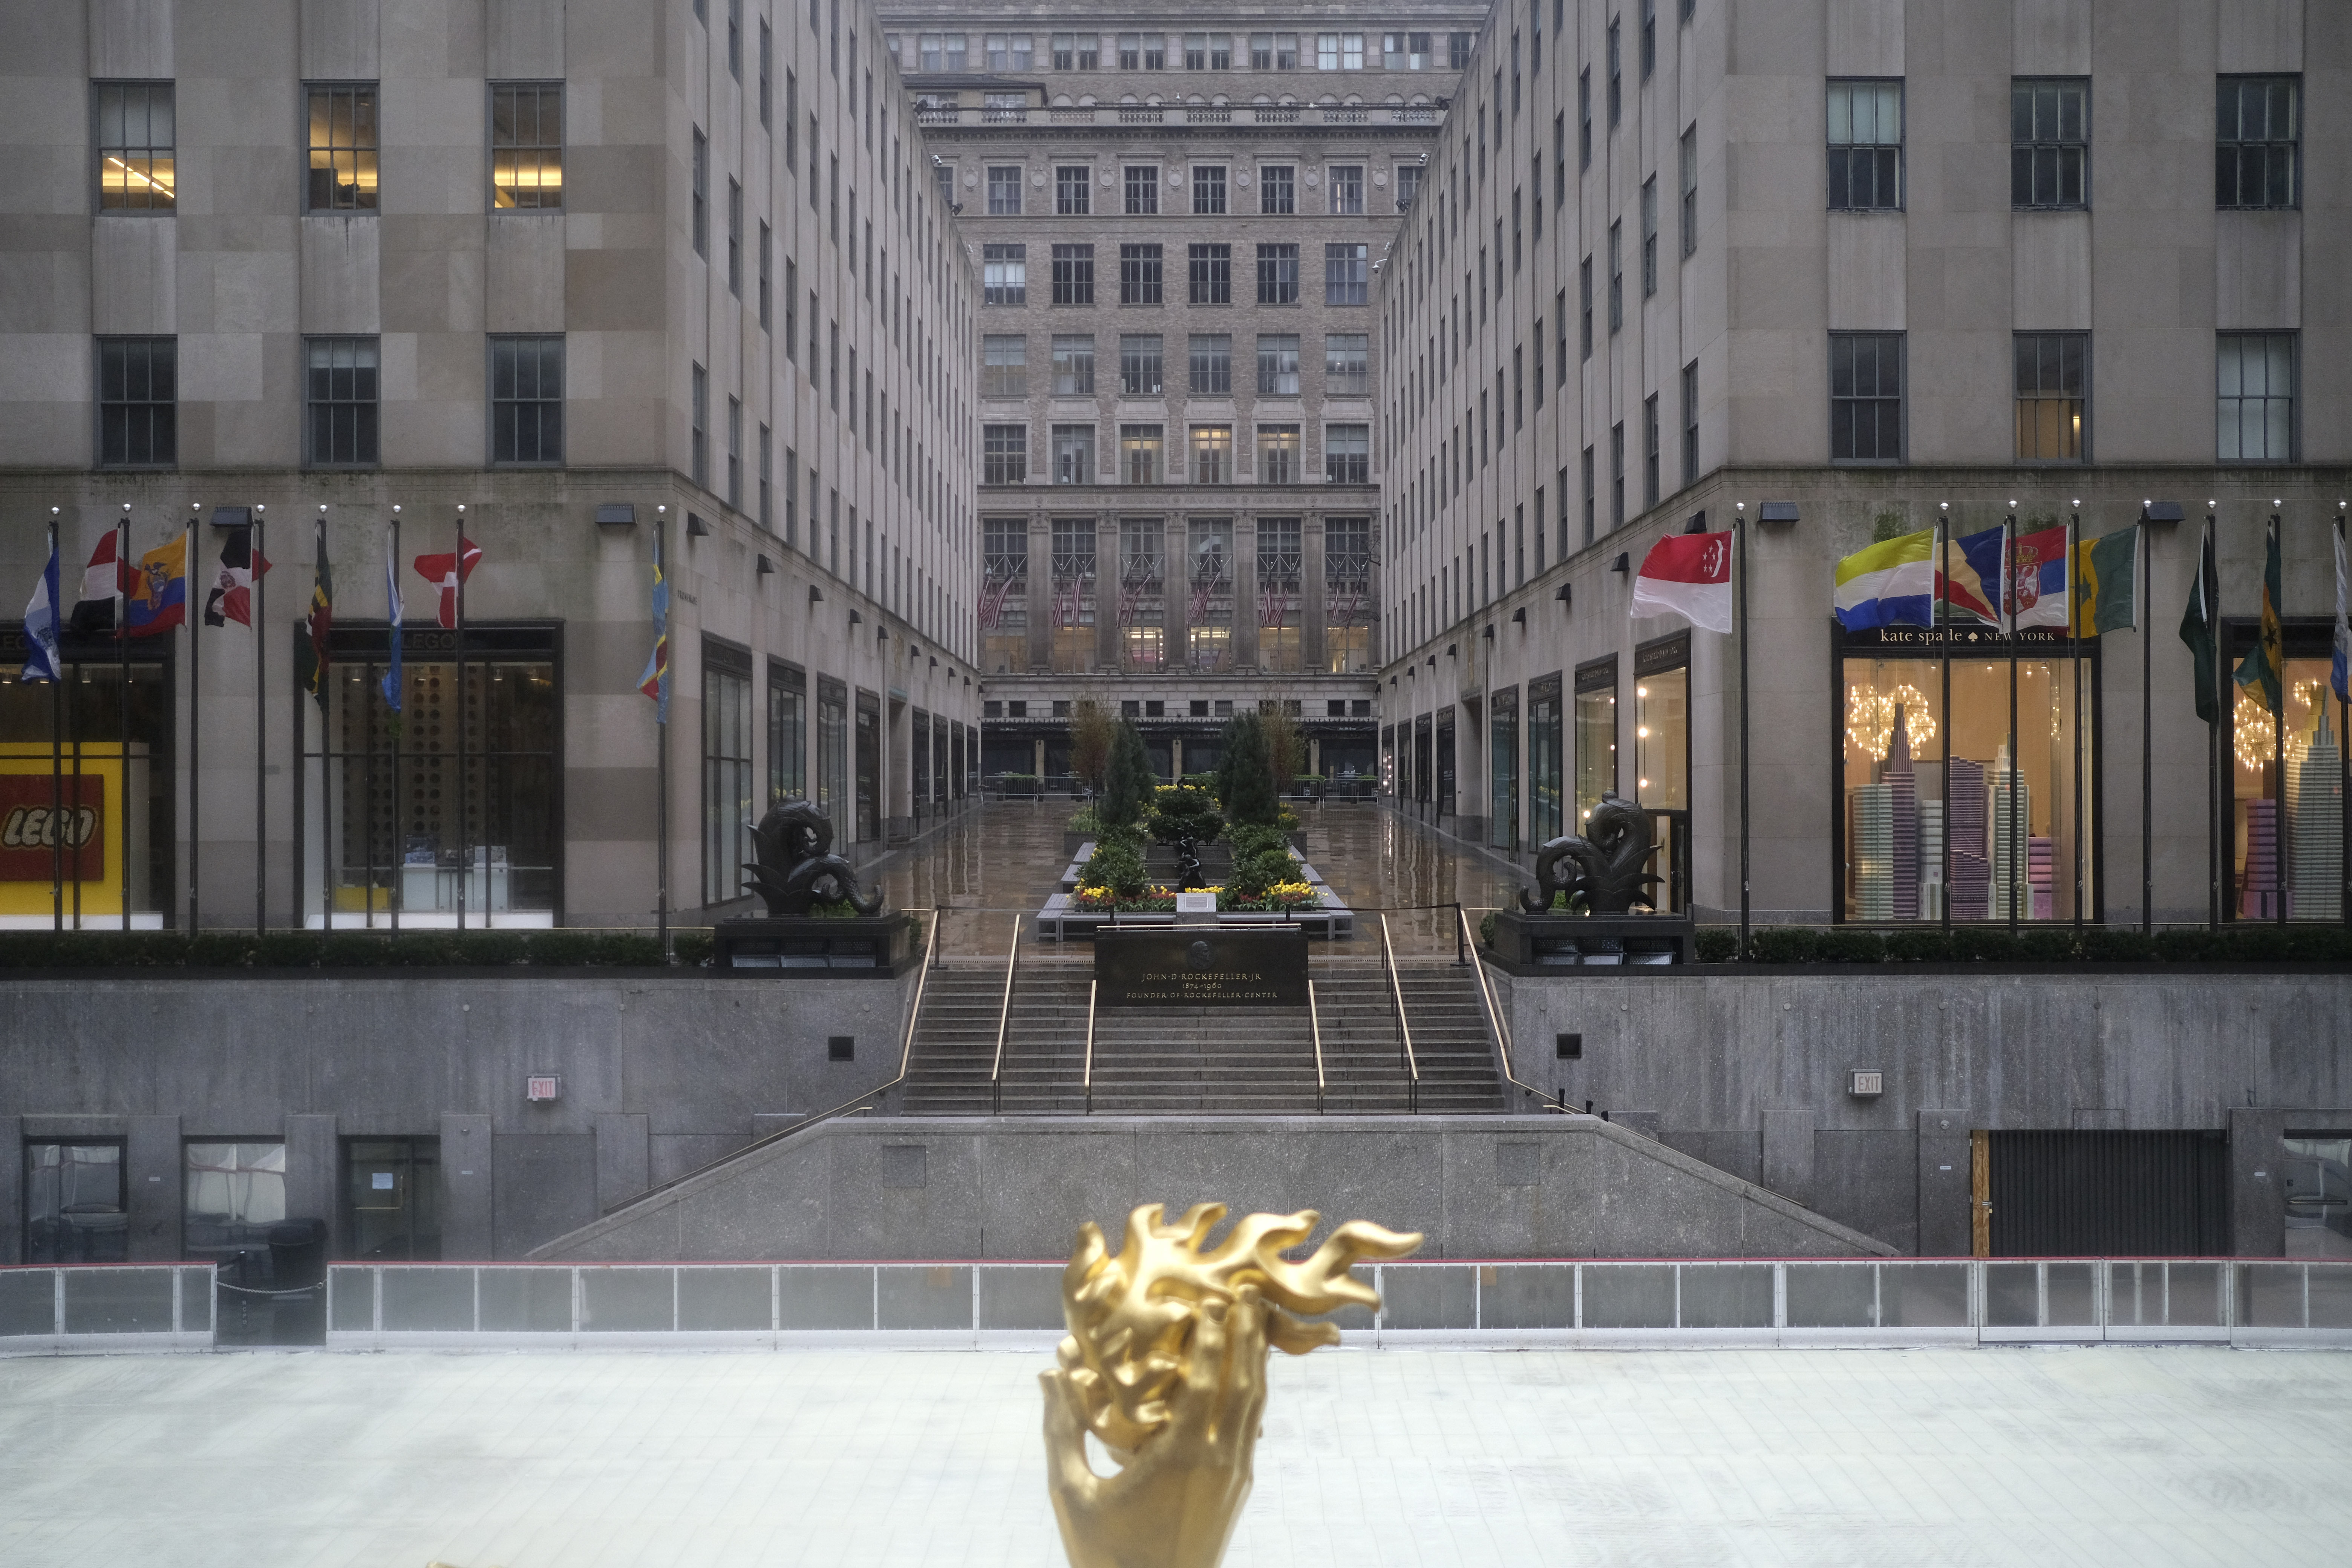 Rockefeller Center is empty on a rainy day in New York, Monday, April 13, 2020. Gov. Andrew Cuomo says New York's death toll from coronavirus has topped 10,000, with hospitals still seeing 2,000 new patients a day. The death tally hit the milestone only about a month after the state recorded its first death. (AP Photo/Seth Wenig)